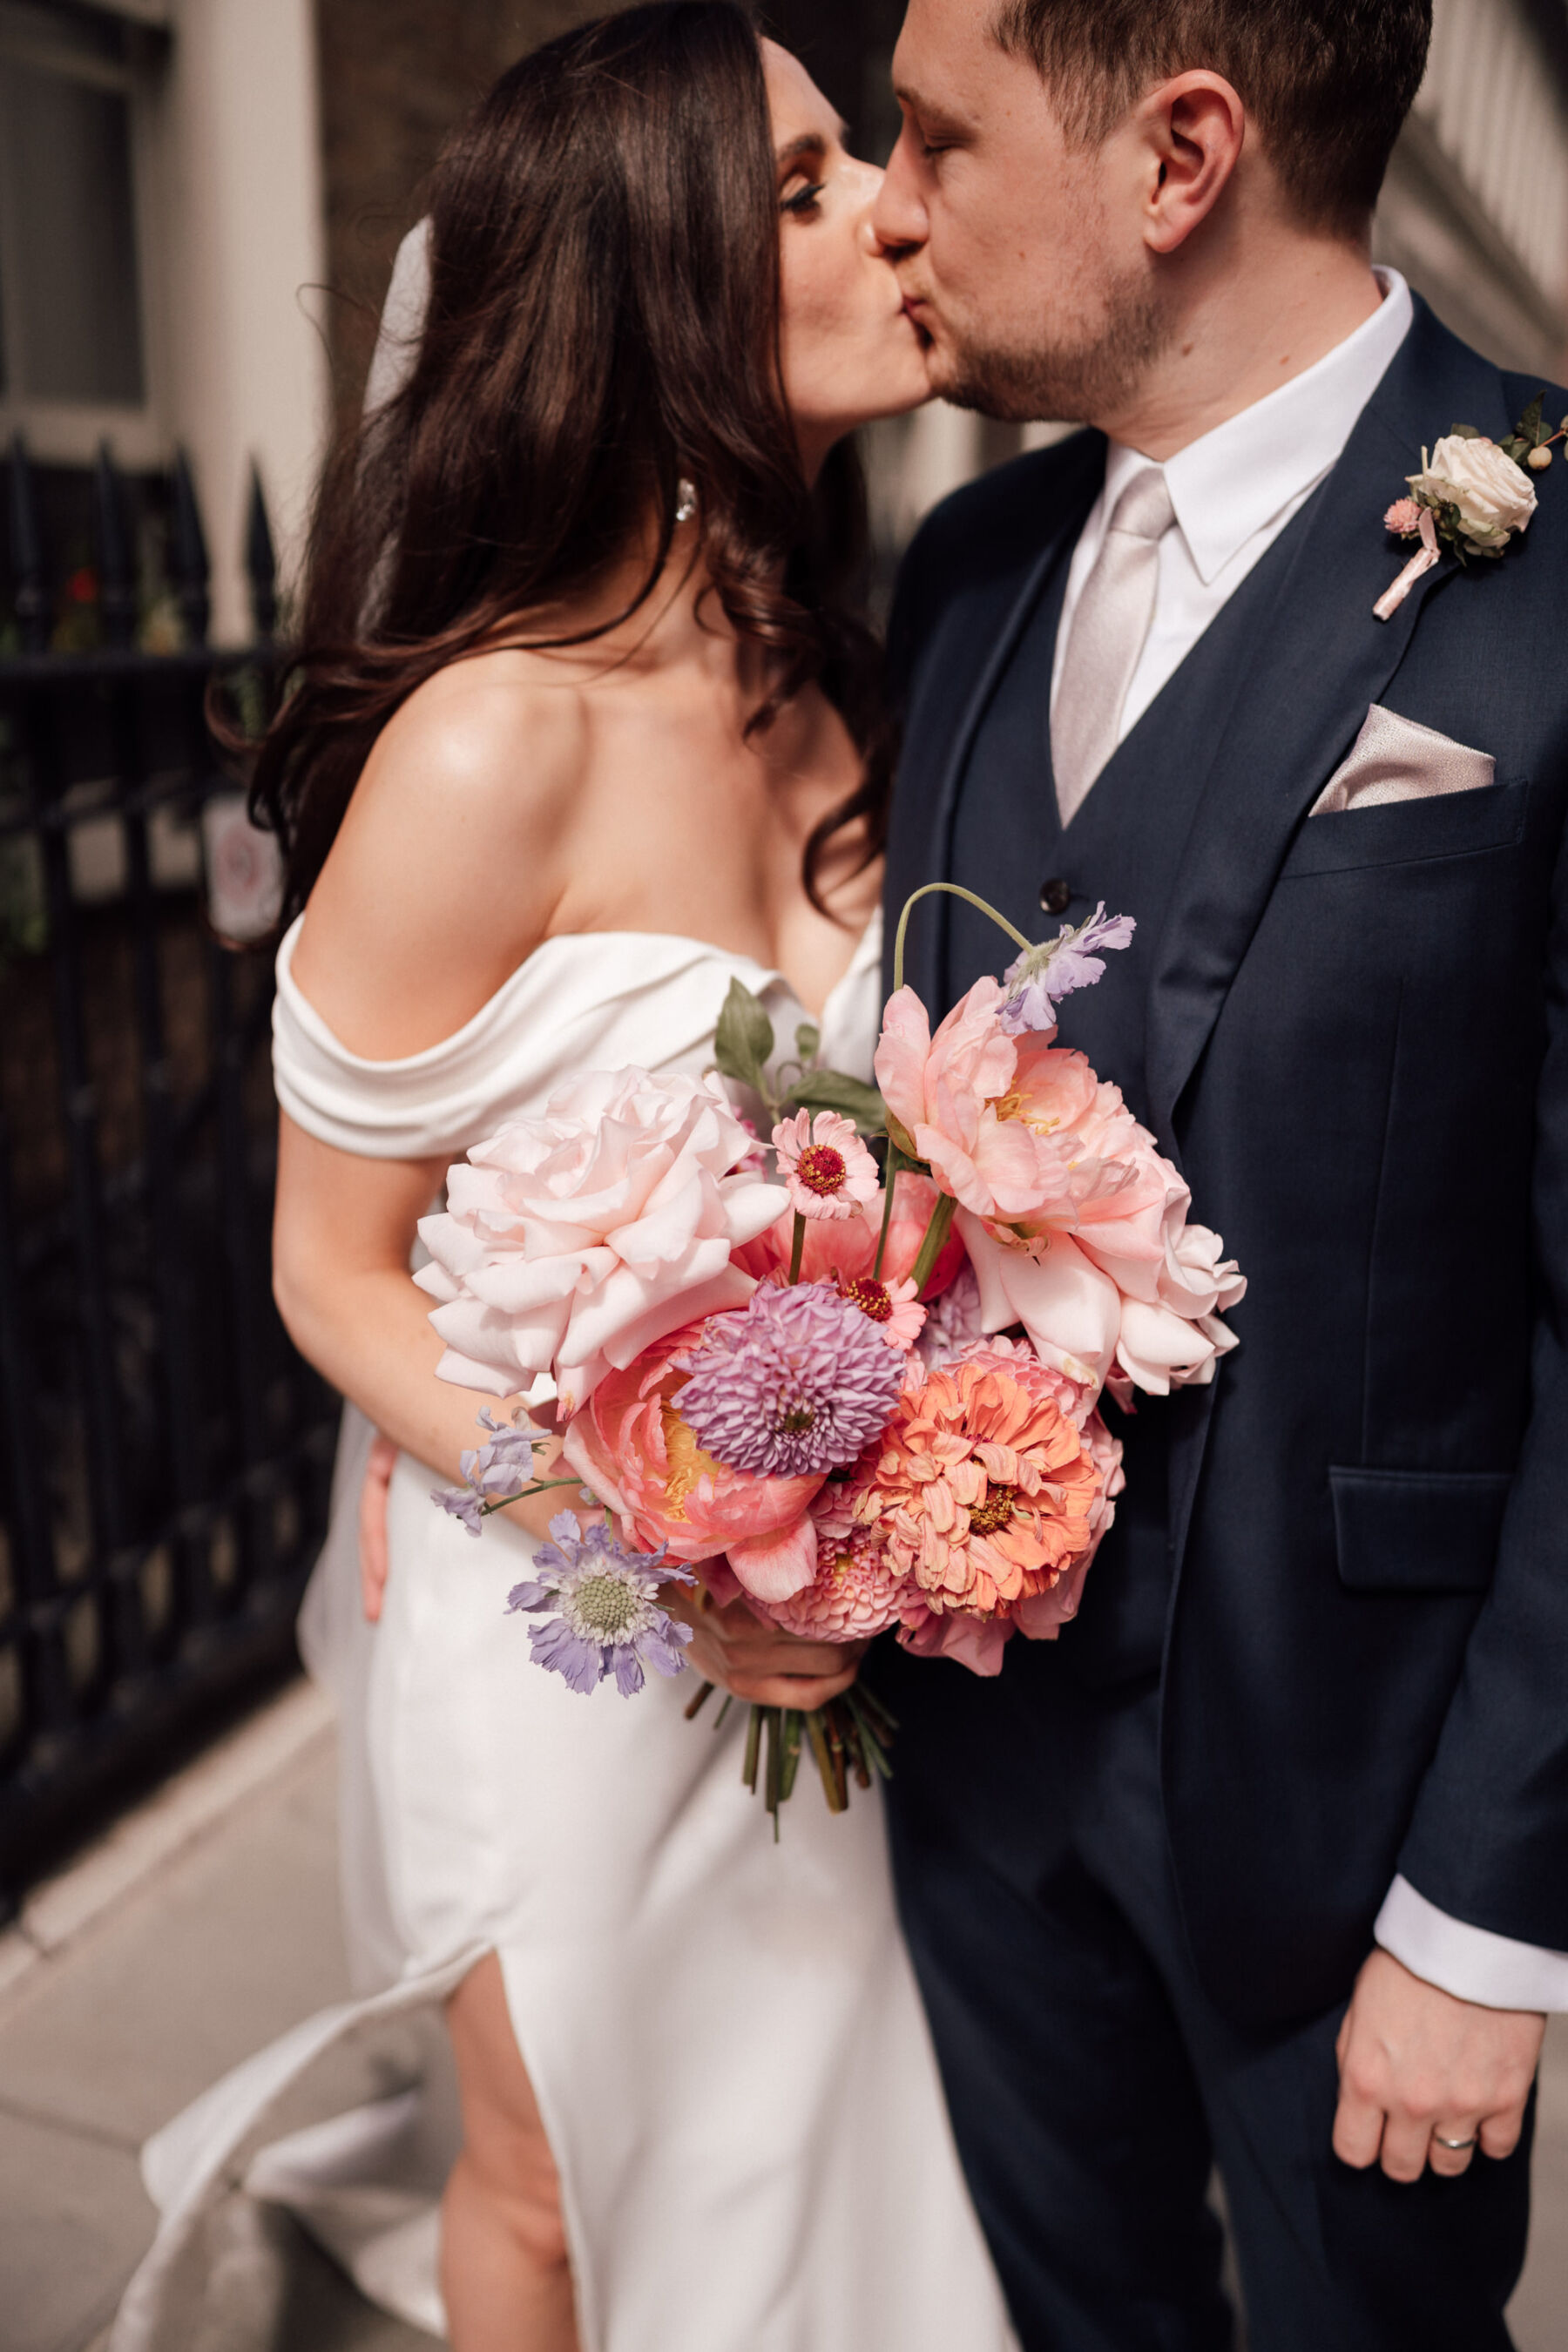 Bride in Roxy by Suzanne Neville, carrying a large, bright and bold bouquet by BUD Flora. The Shannons Phtoography.